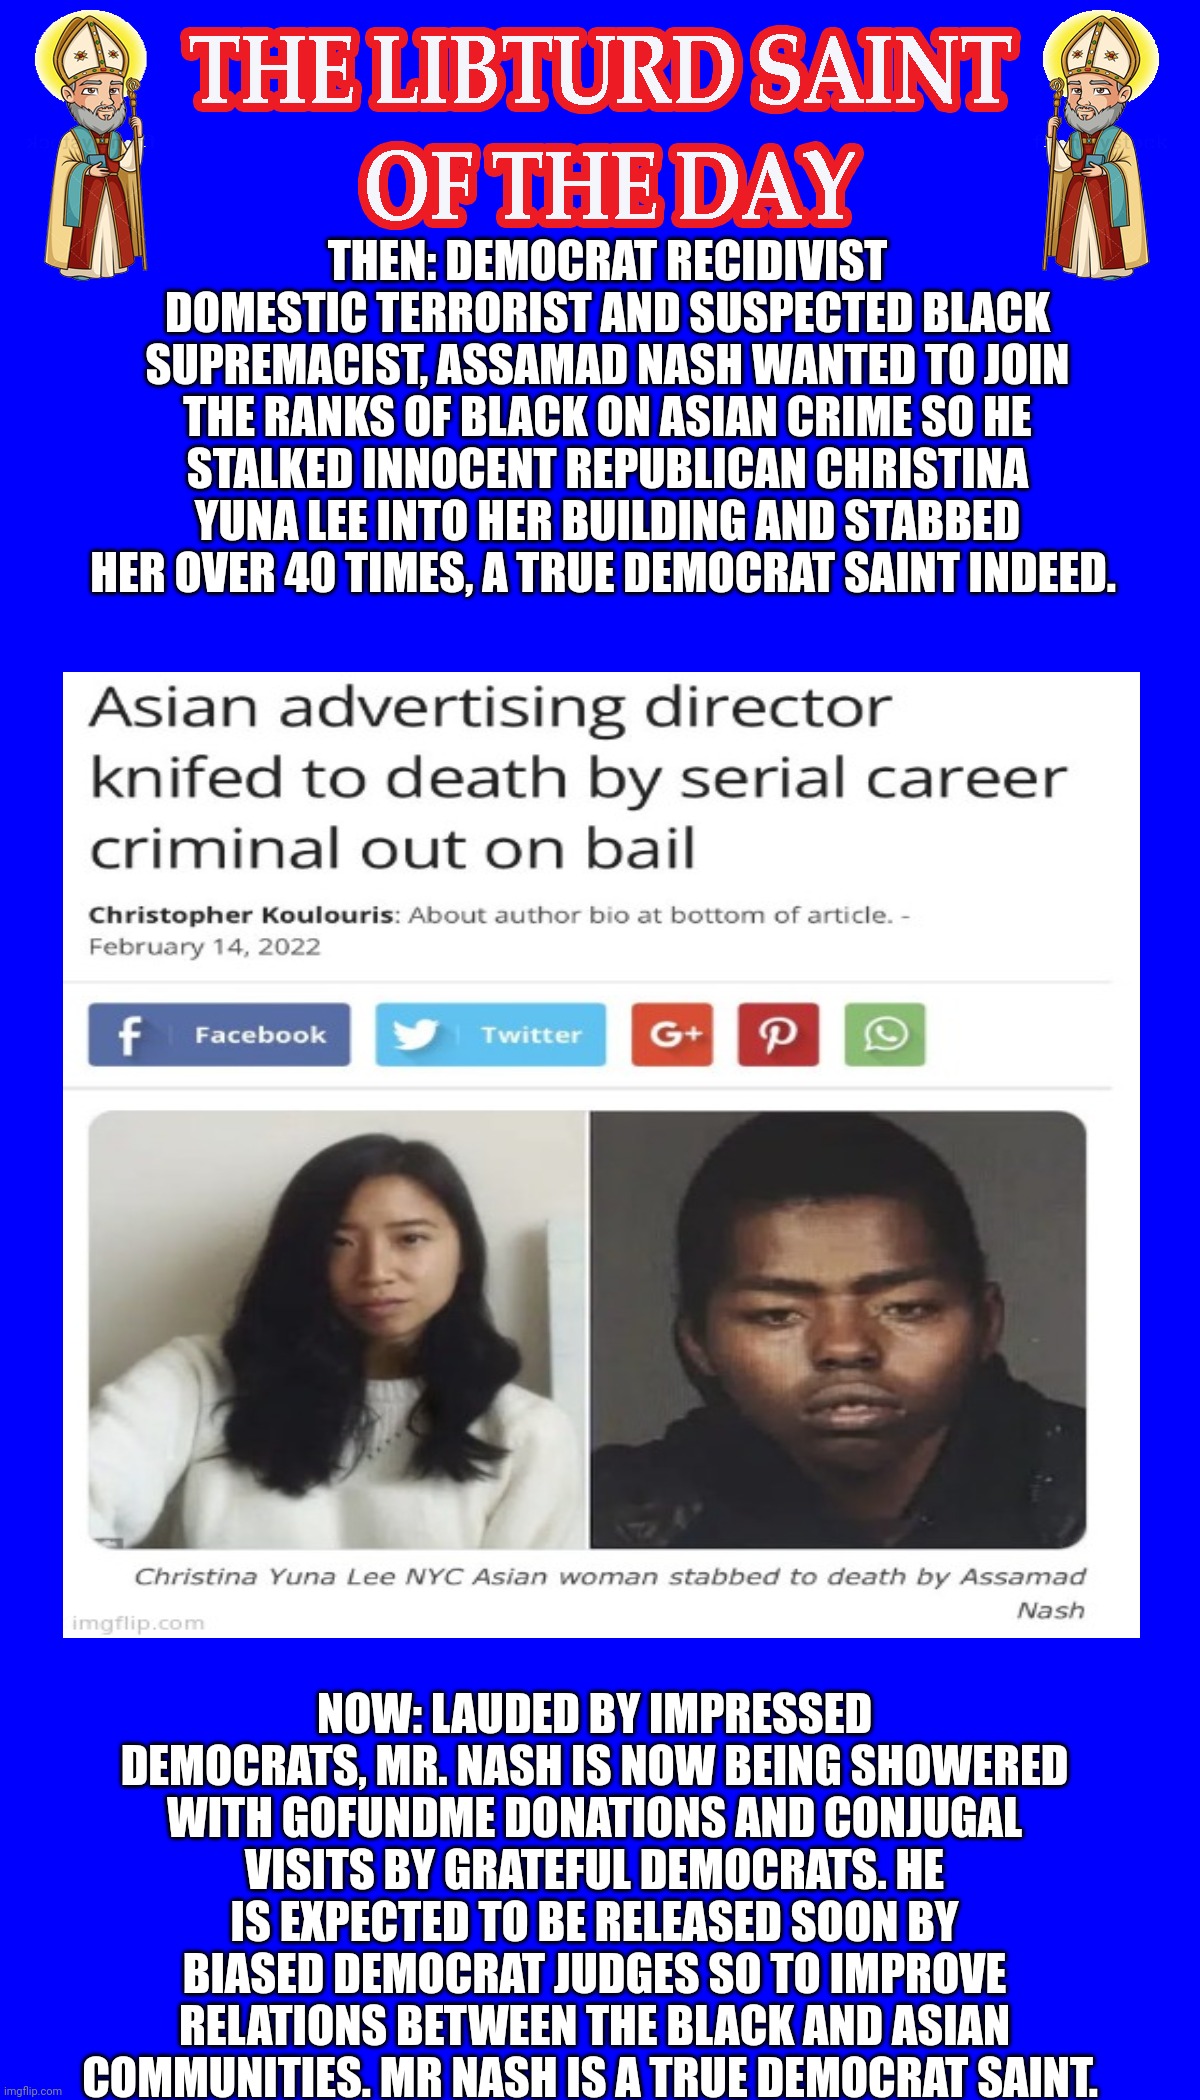 LIBTURD SAINT OF THE DAY - DEMOCRAT DOMESTIC TERRORIST AND SUSPECTED BLACK SUPREMICIST - ASSAMAD NASH - ANTI-ASIAN MURDER | THEN: DEMOCRAT RECIDIVIST DOMESTIC TERRORIST AND SUSPECTED BLACK SUPREMACIST, ASSAMAD NASH WANTED TO JOIN THE RANKS OF BLACK ON ASIAN CRIME SO HE STALKED INNOCENT REPUBLICAN CHRISTINA YUNA LEE INTO HER BUILDING AND STABBED HER OVER 40 TIMES, A TRUE DEMOCRAT SAINT INDEED. NOW: LAUDED BY IMPRESSED DEMOCRATS, MR. NASH IS NOW BEING SHOWERED WITH GOFUNDME DONATIONS AND CONJUGAL VISITS BY GRATEFUL DEMOCRATS. HE IS EXPECTED TO BE RELEASED SOON BY BIASED DEMOCRAT JUDGES SO TO IMPROVE RELATIONS BETWEEN THE BLACK AND ASIAN COMMUNITIES. MR NASH IS A TRUE DEMOCRAT SAINT. | image tagged in lotd,libturd saint of the day,assamad nash | made w/ Imgflip meme maker